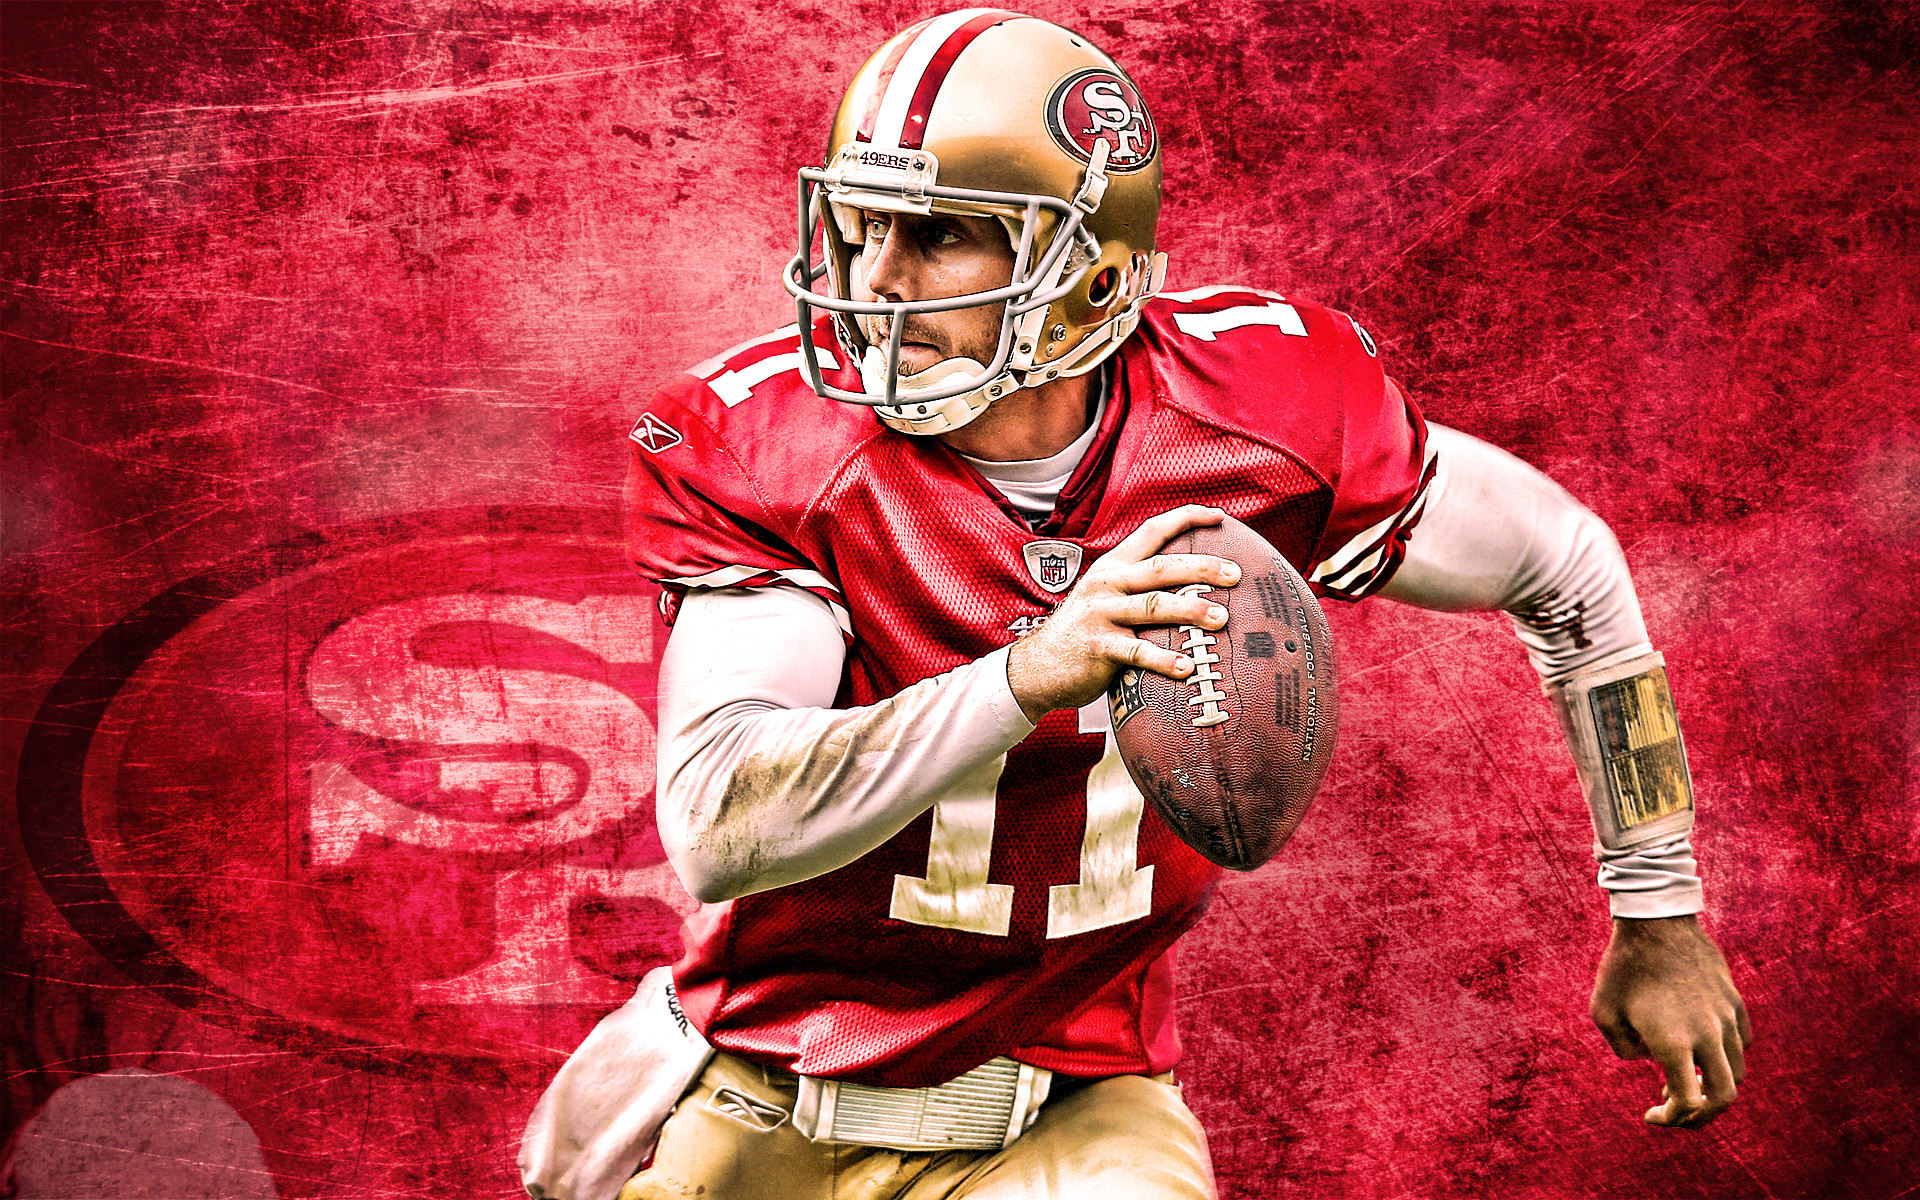 1920x1200 49er radio 49ers wallpapers 49ers images 49ers hd wallpapers 49ers .